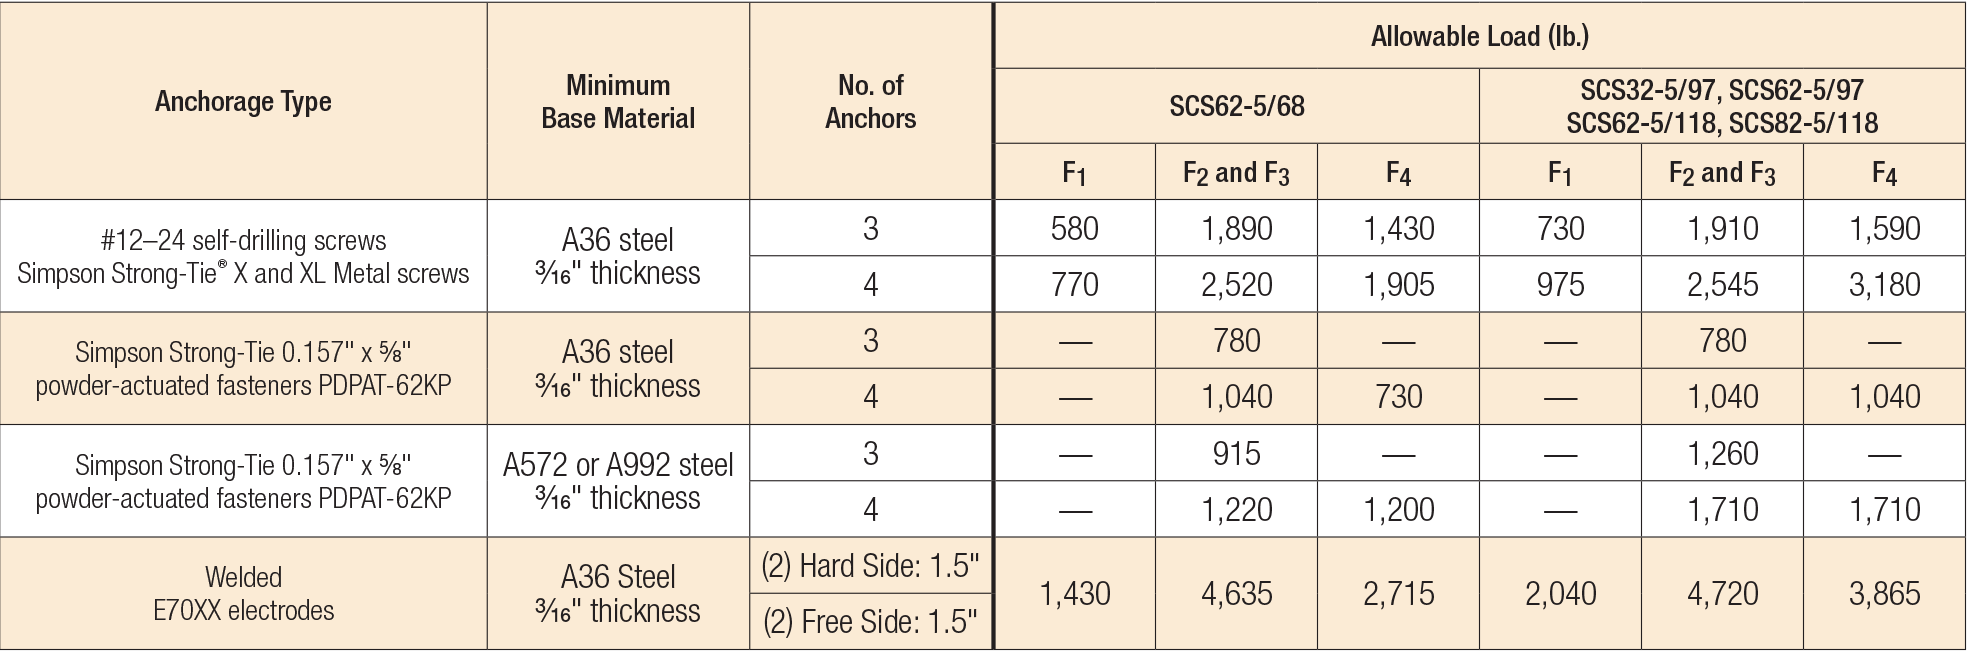 SCS Allowable Anchorage Loads to Steel